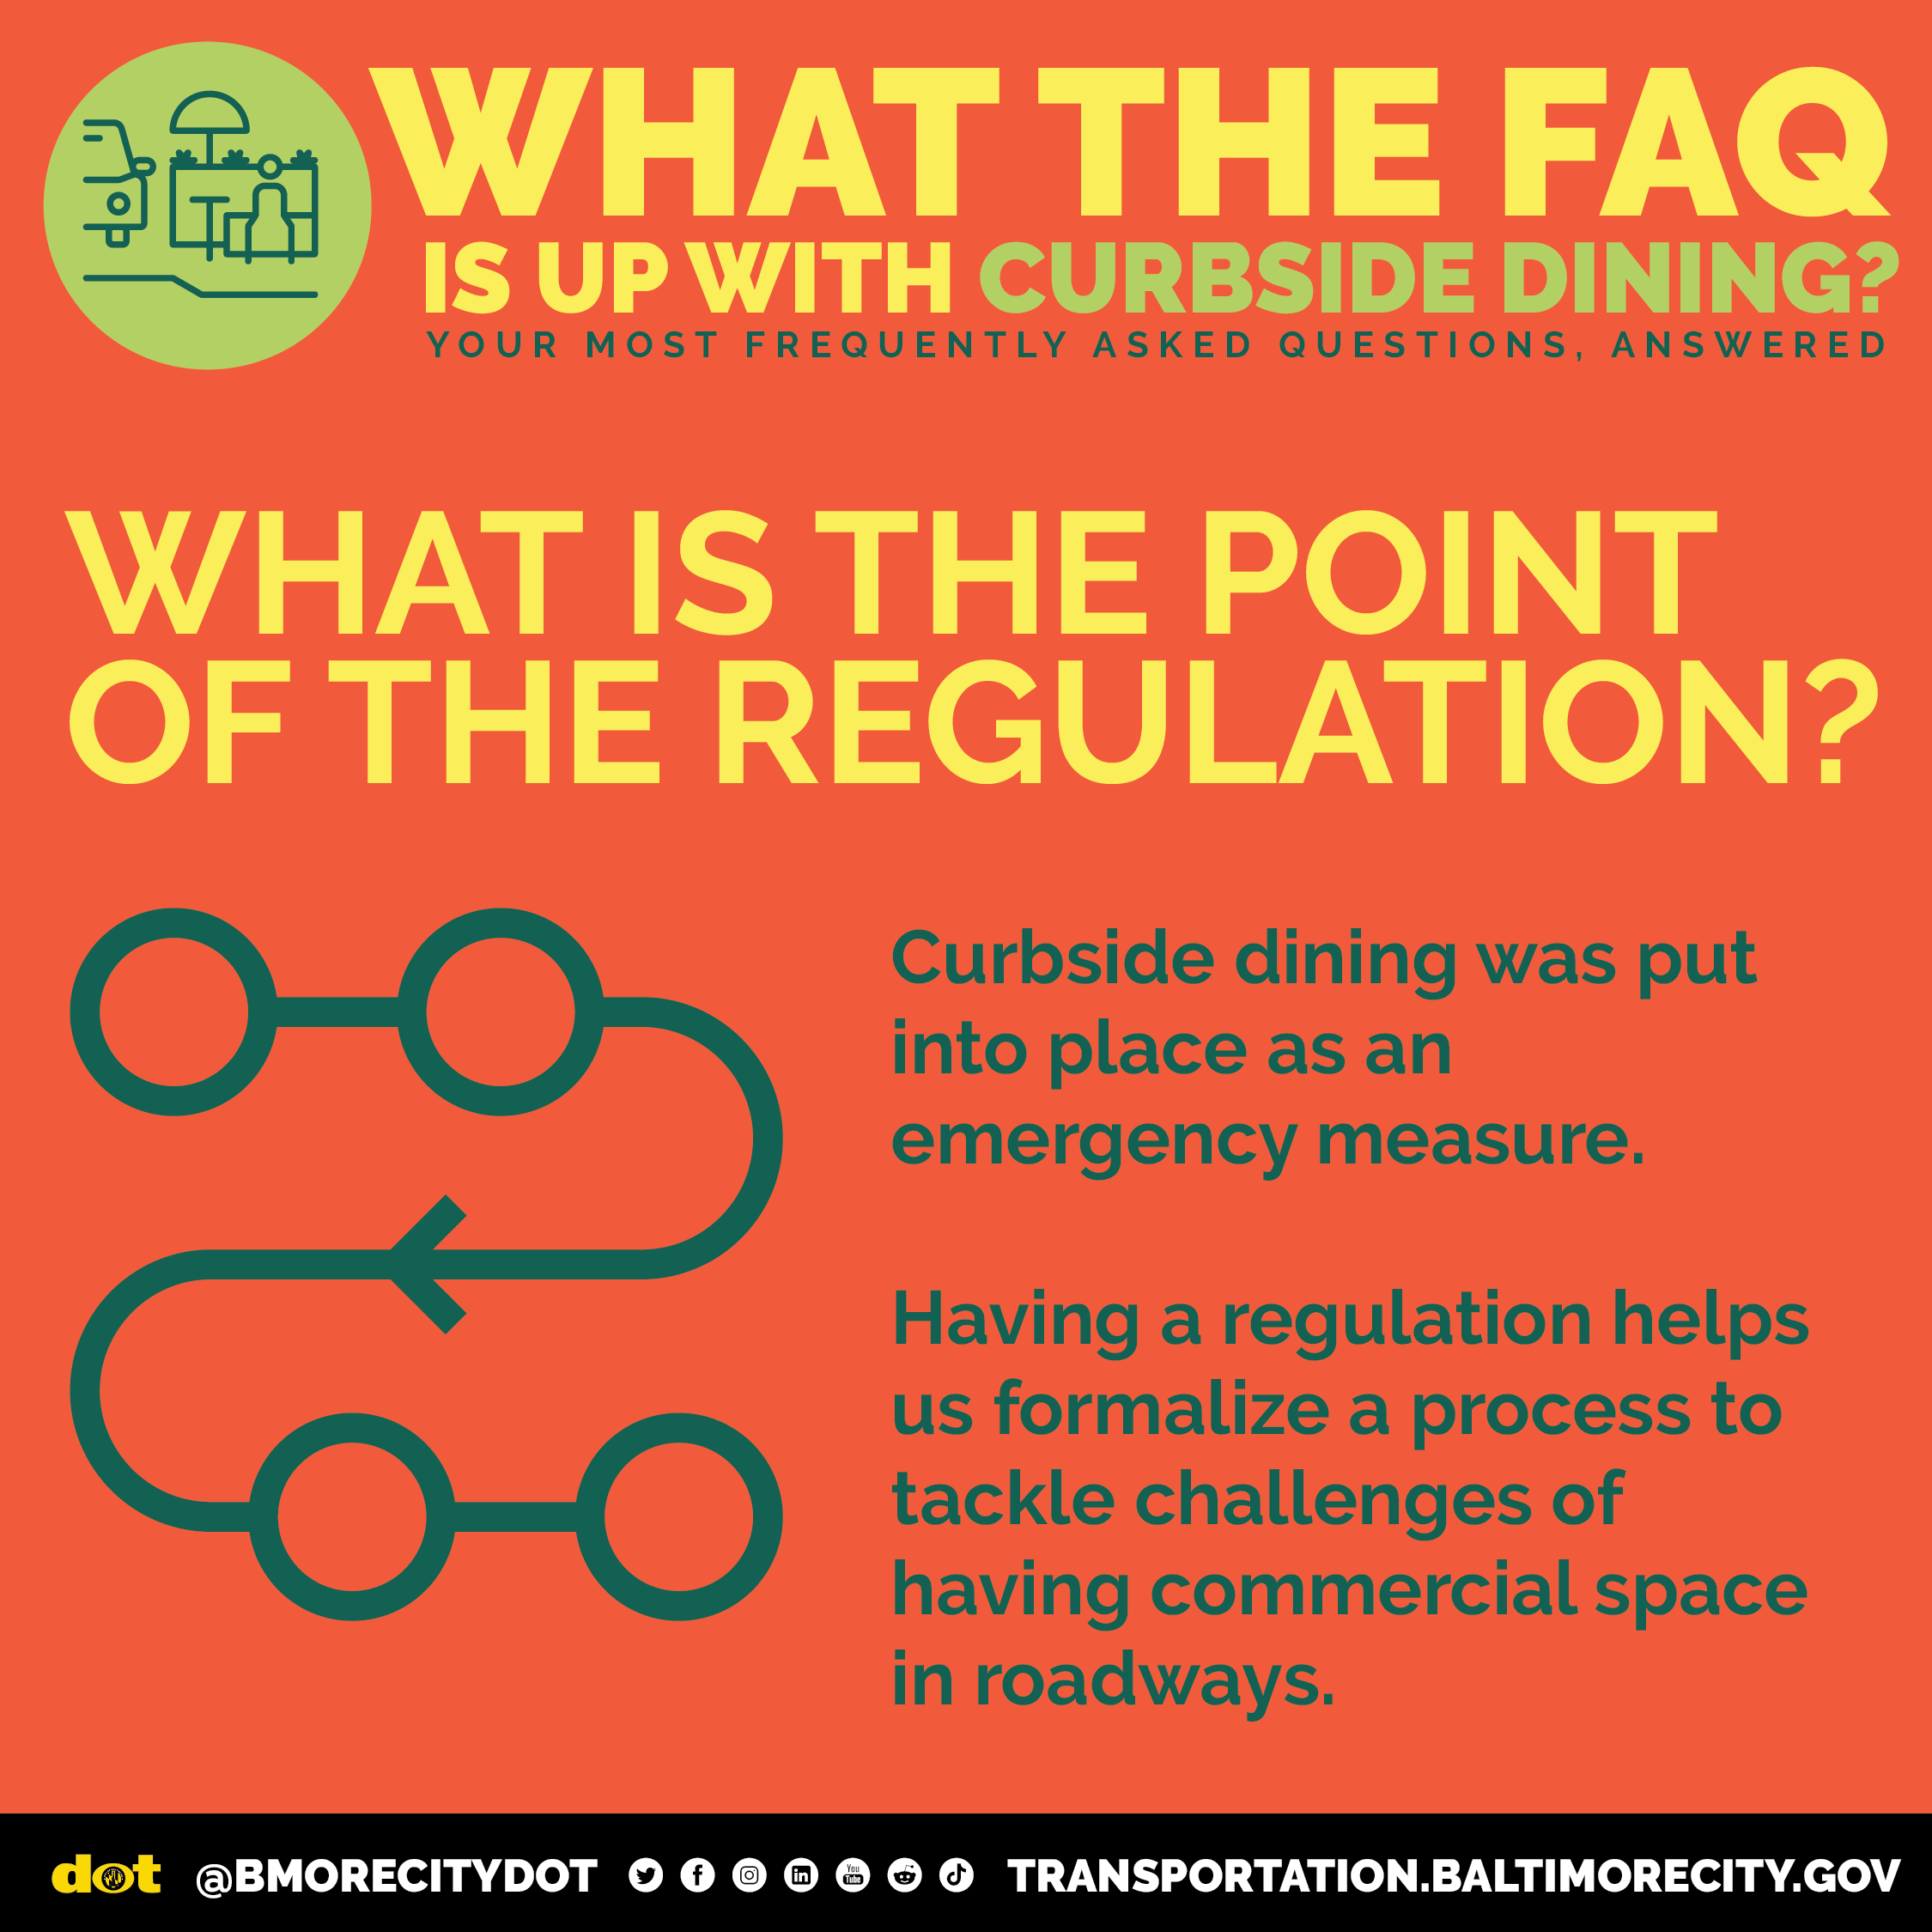 What is the point of the regulation?